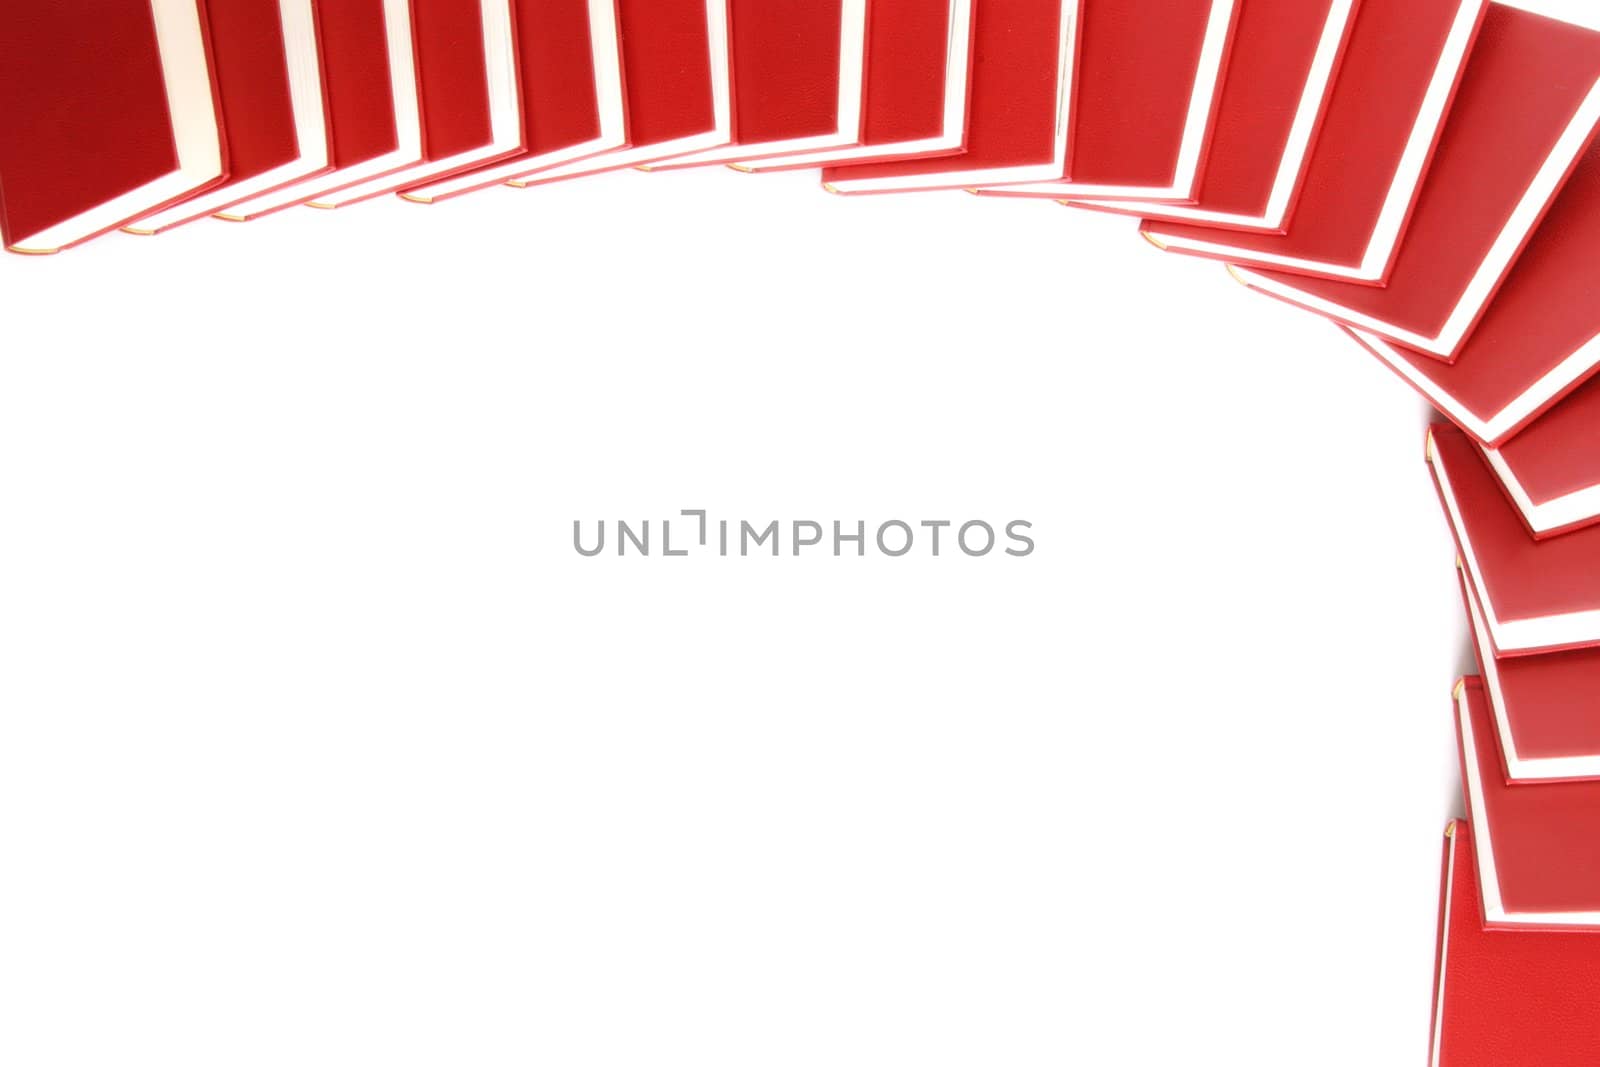 stack of red books isolated on white